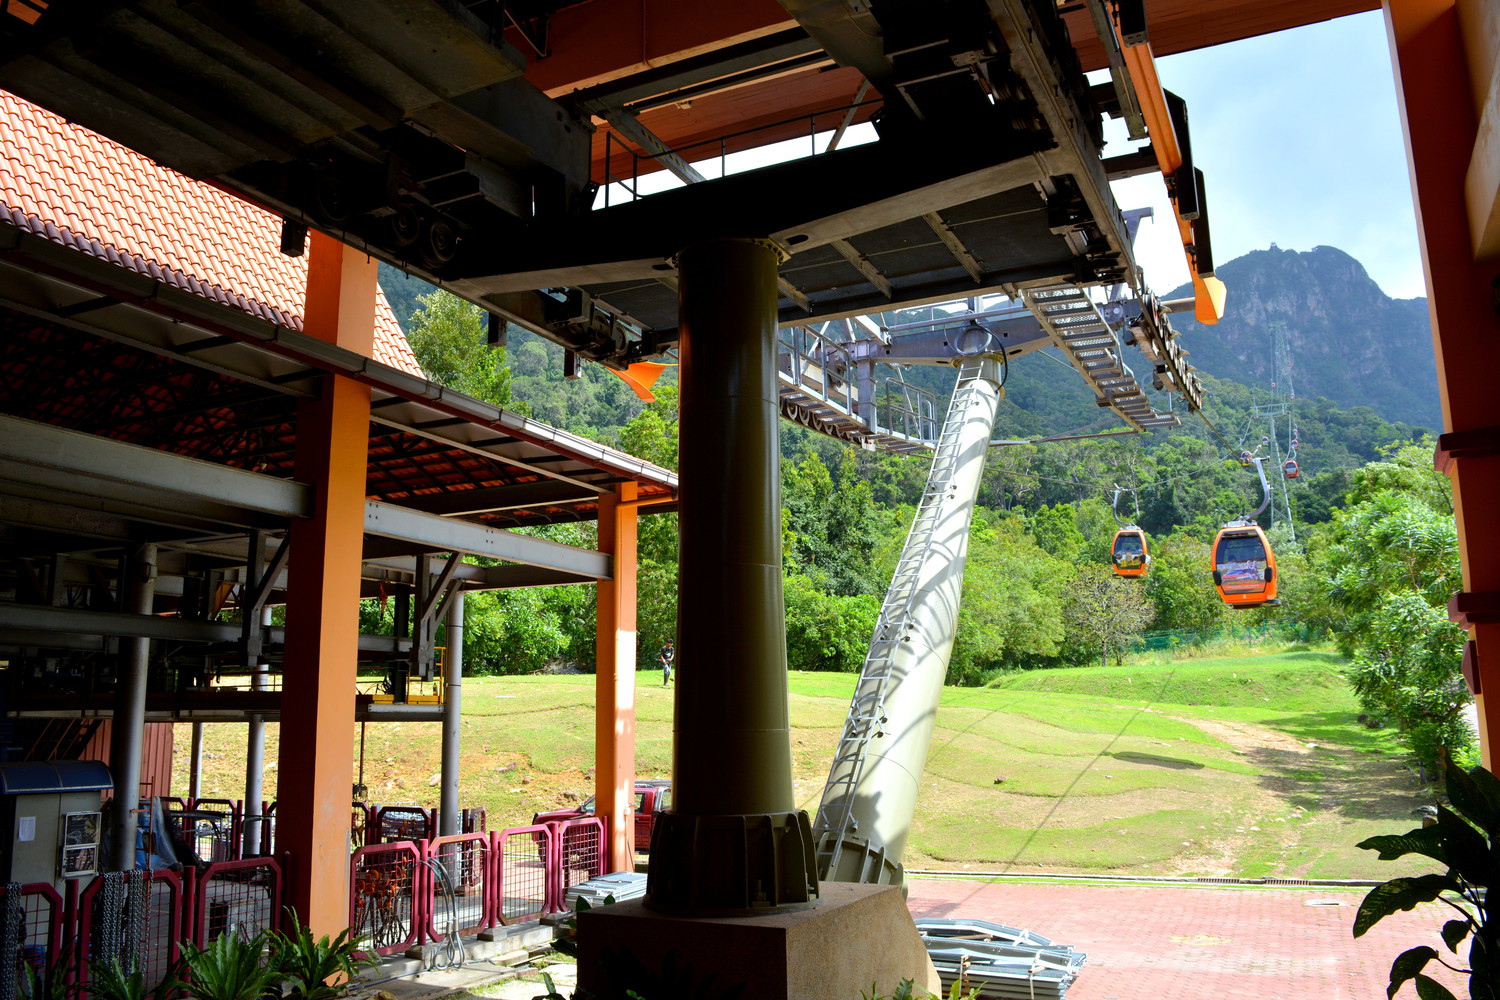 A cable car station with a cable car returning from a mountain to the station and another one going up to a mountain